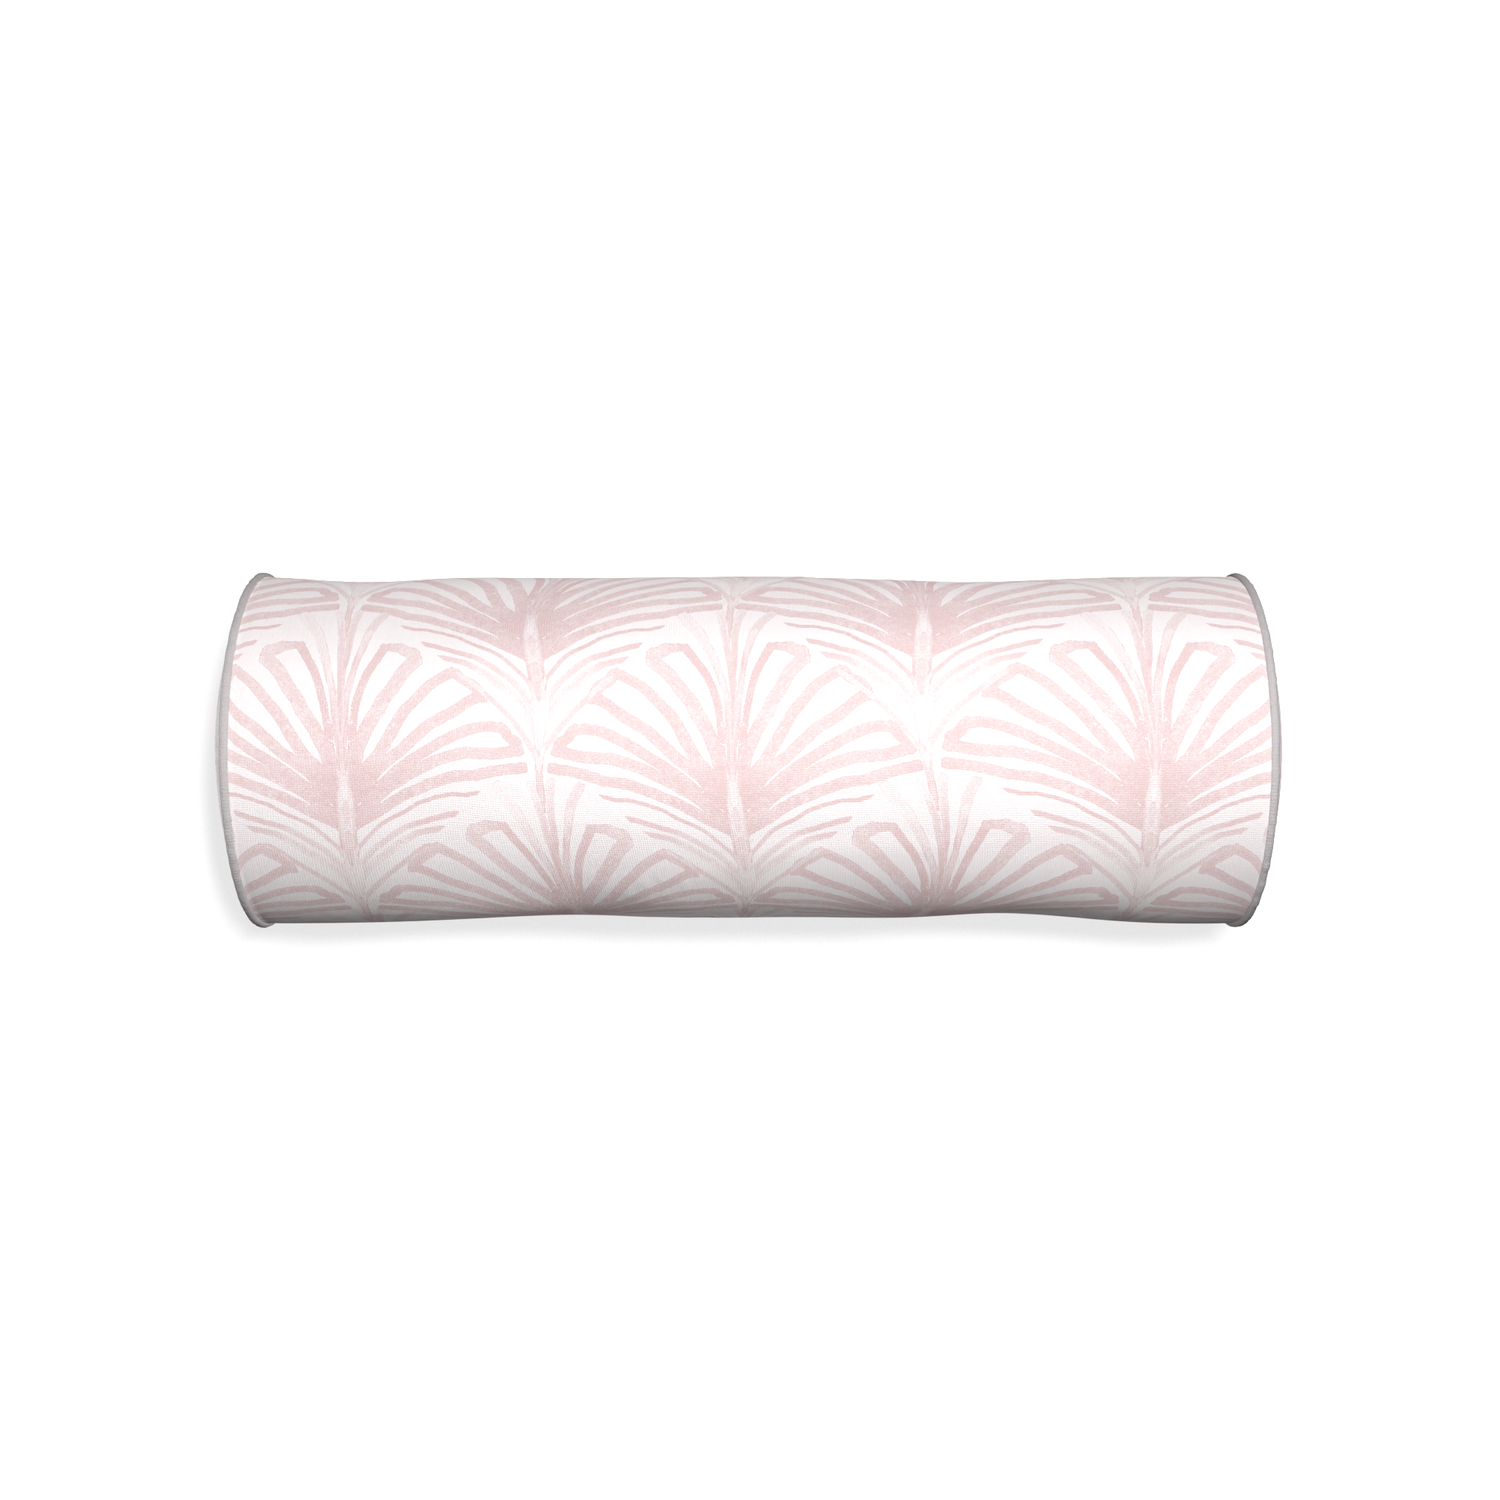 Bolster suzy rose custom rose pink palmpillow with pebble piping on white background